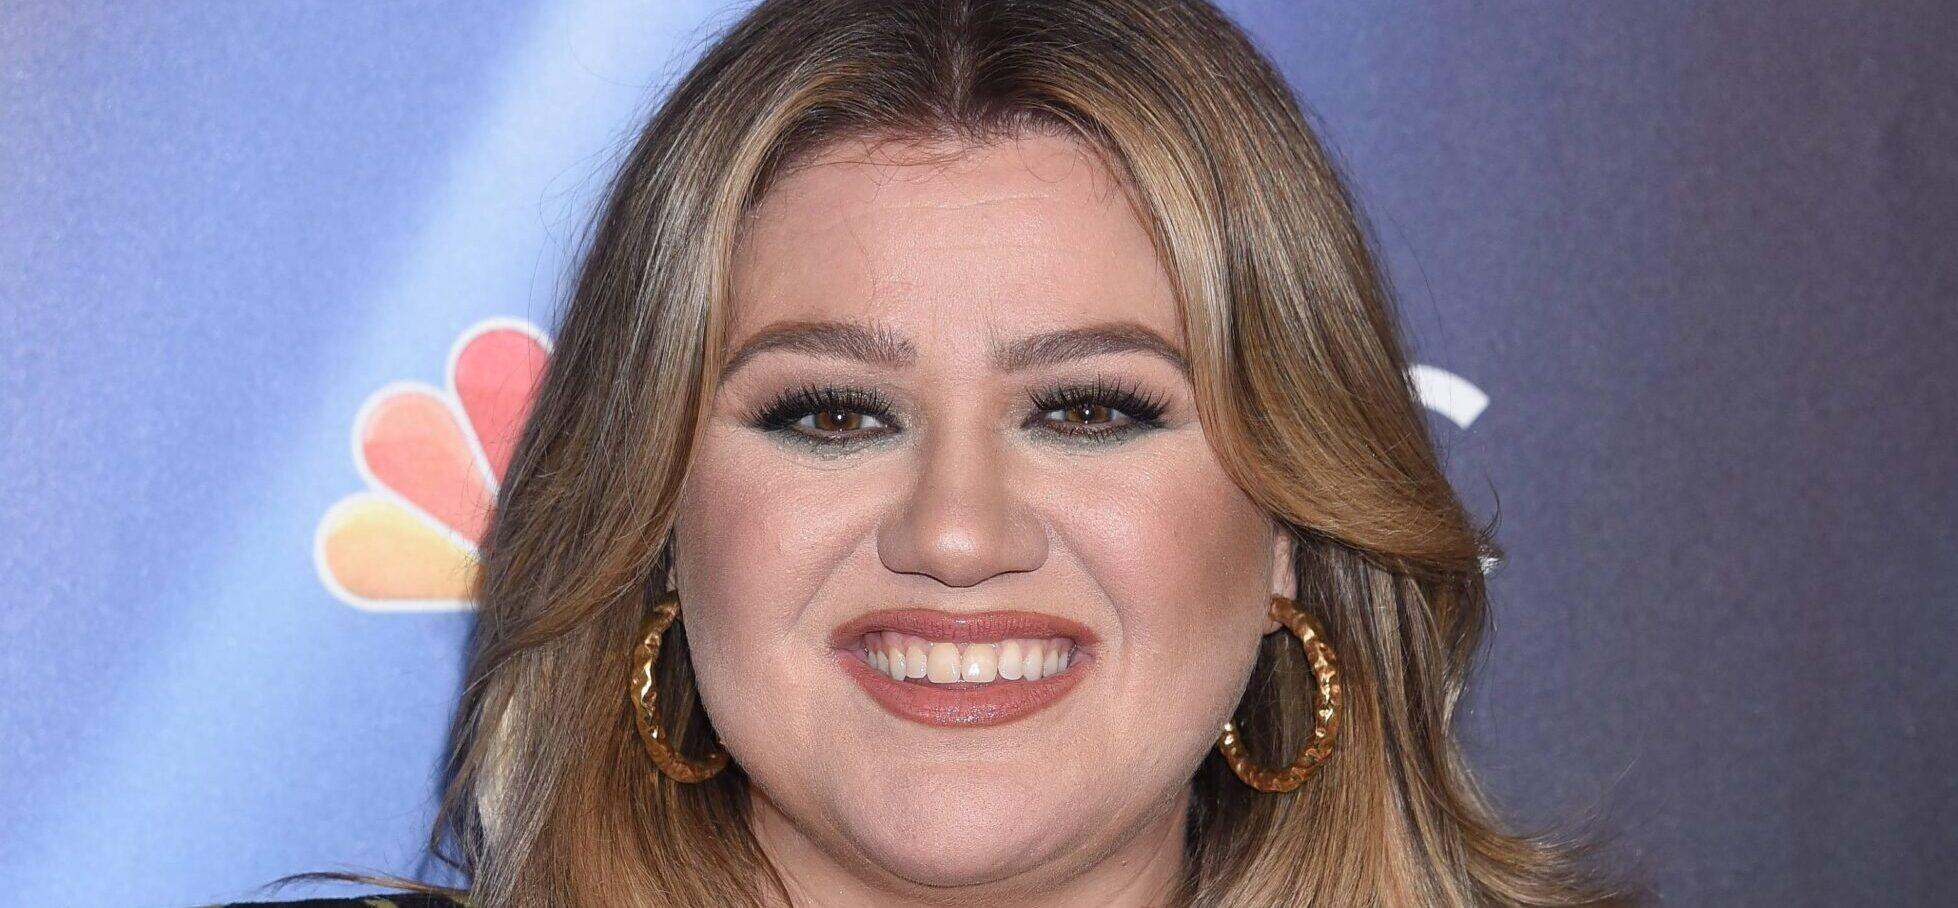 Kelly Clarkson Reveals Specific Health Diagnosis That Sparked Weight Loss